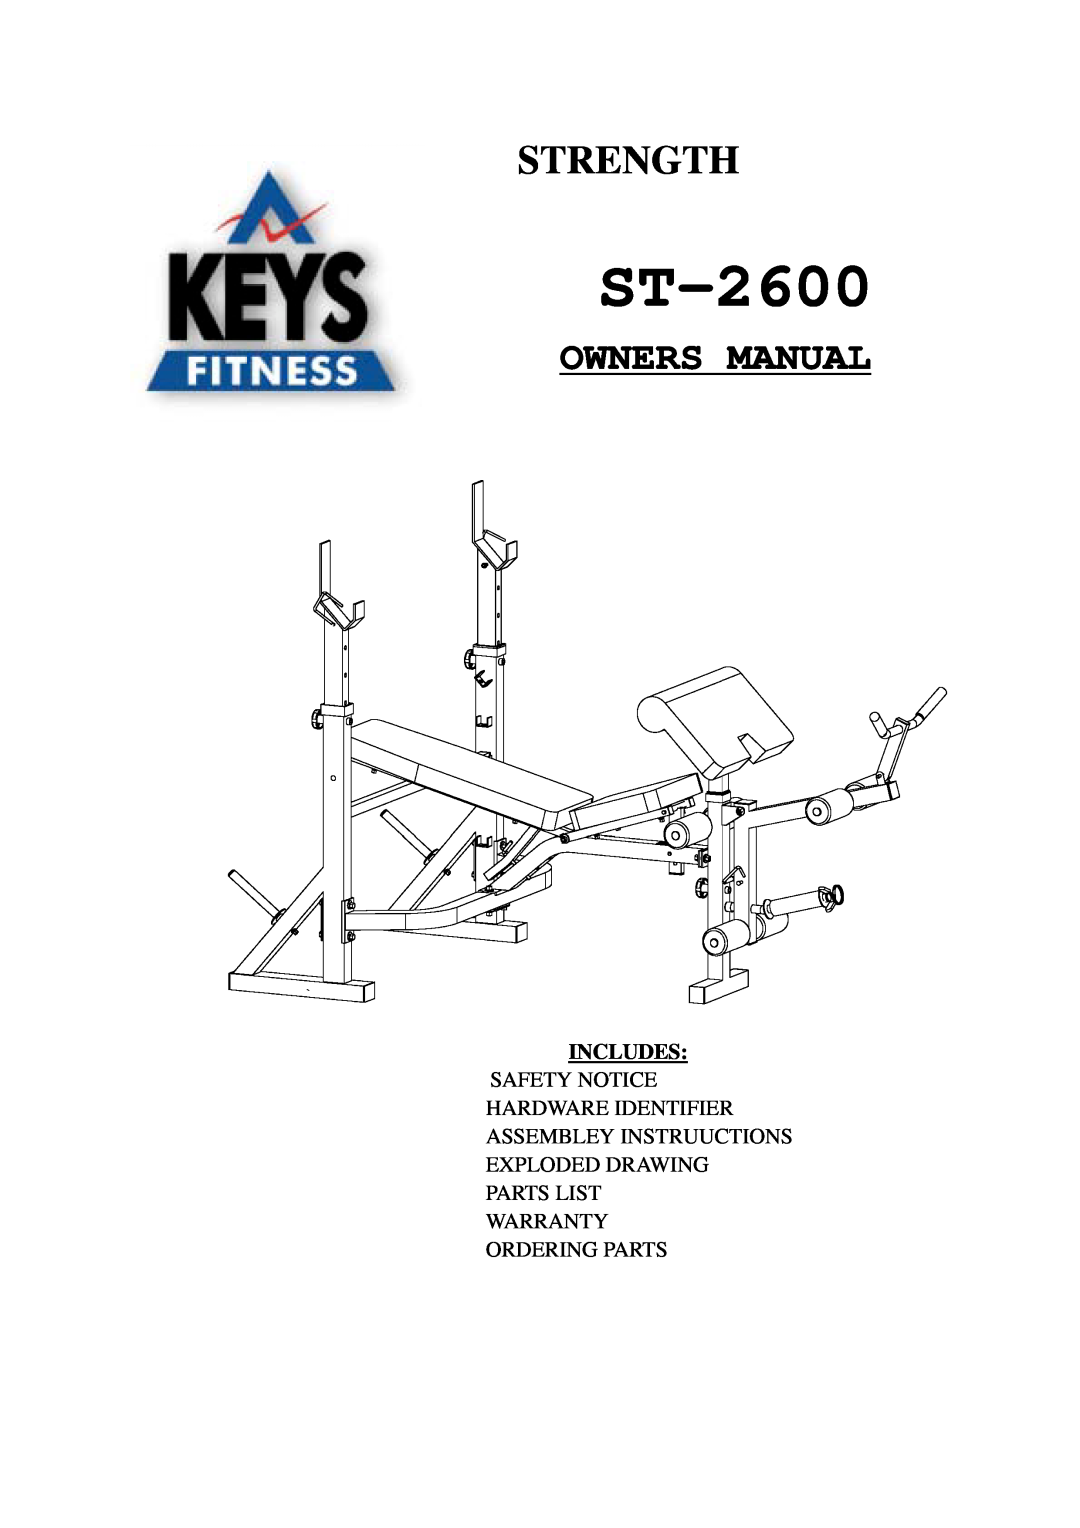 Keys Fitness ST-2600 owner manual Strength Trainer, Owners Manual, Includes 